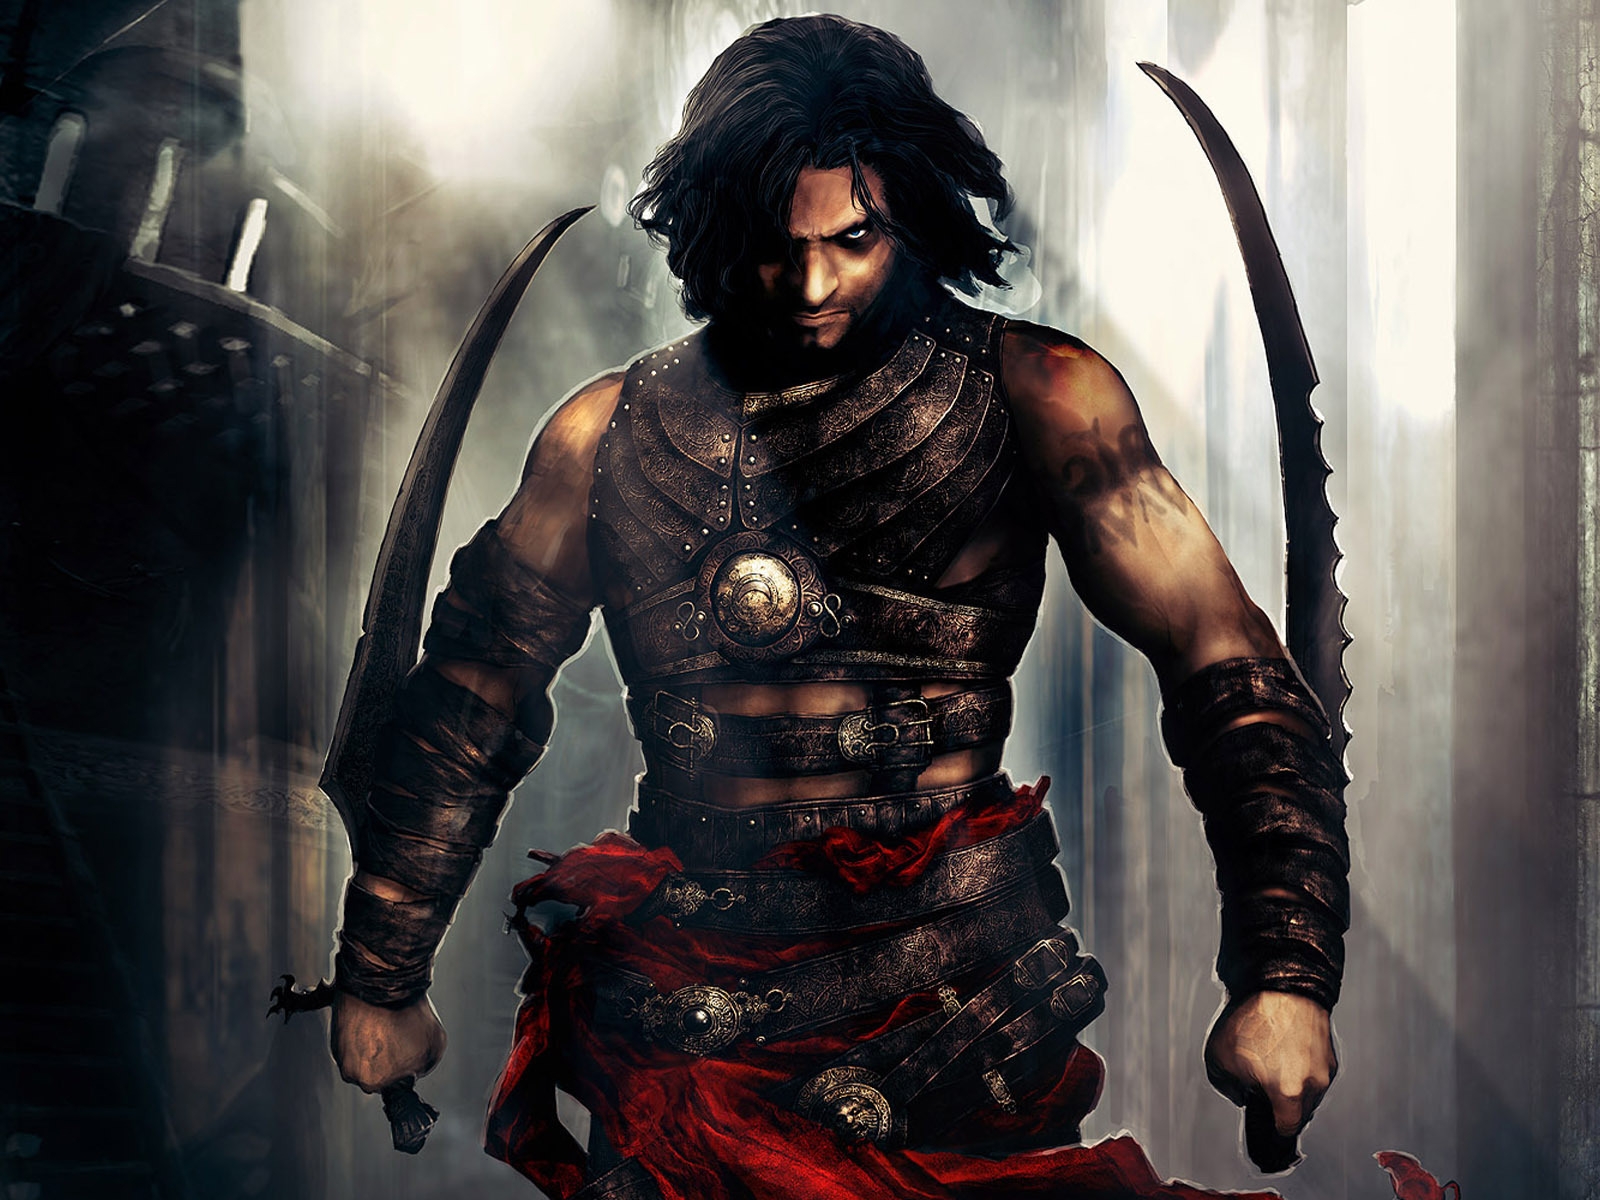 Prince of Persia Scene for 1600 x 1200 resolution